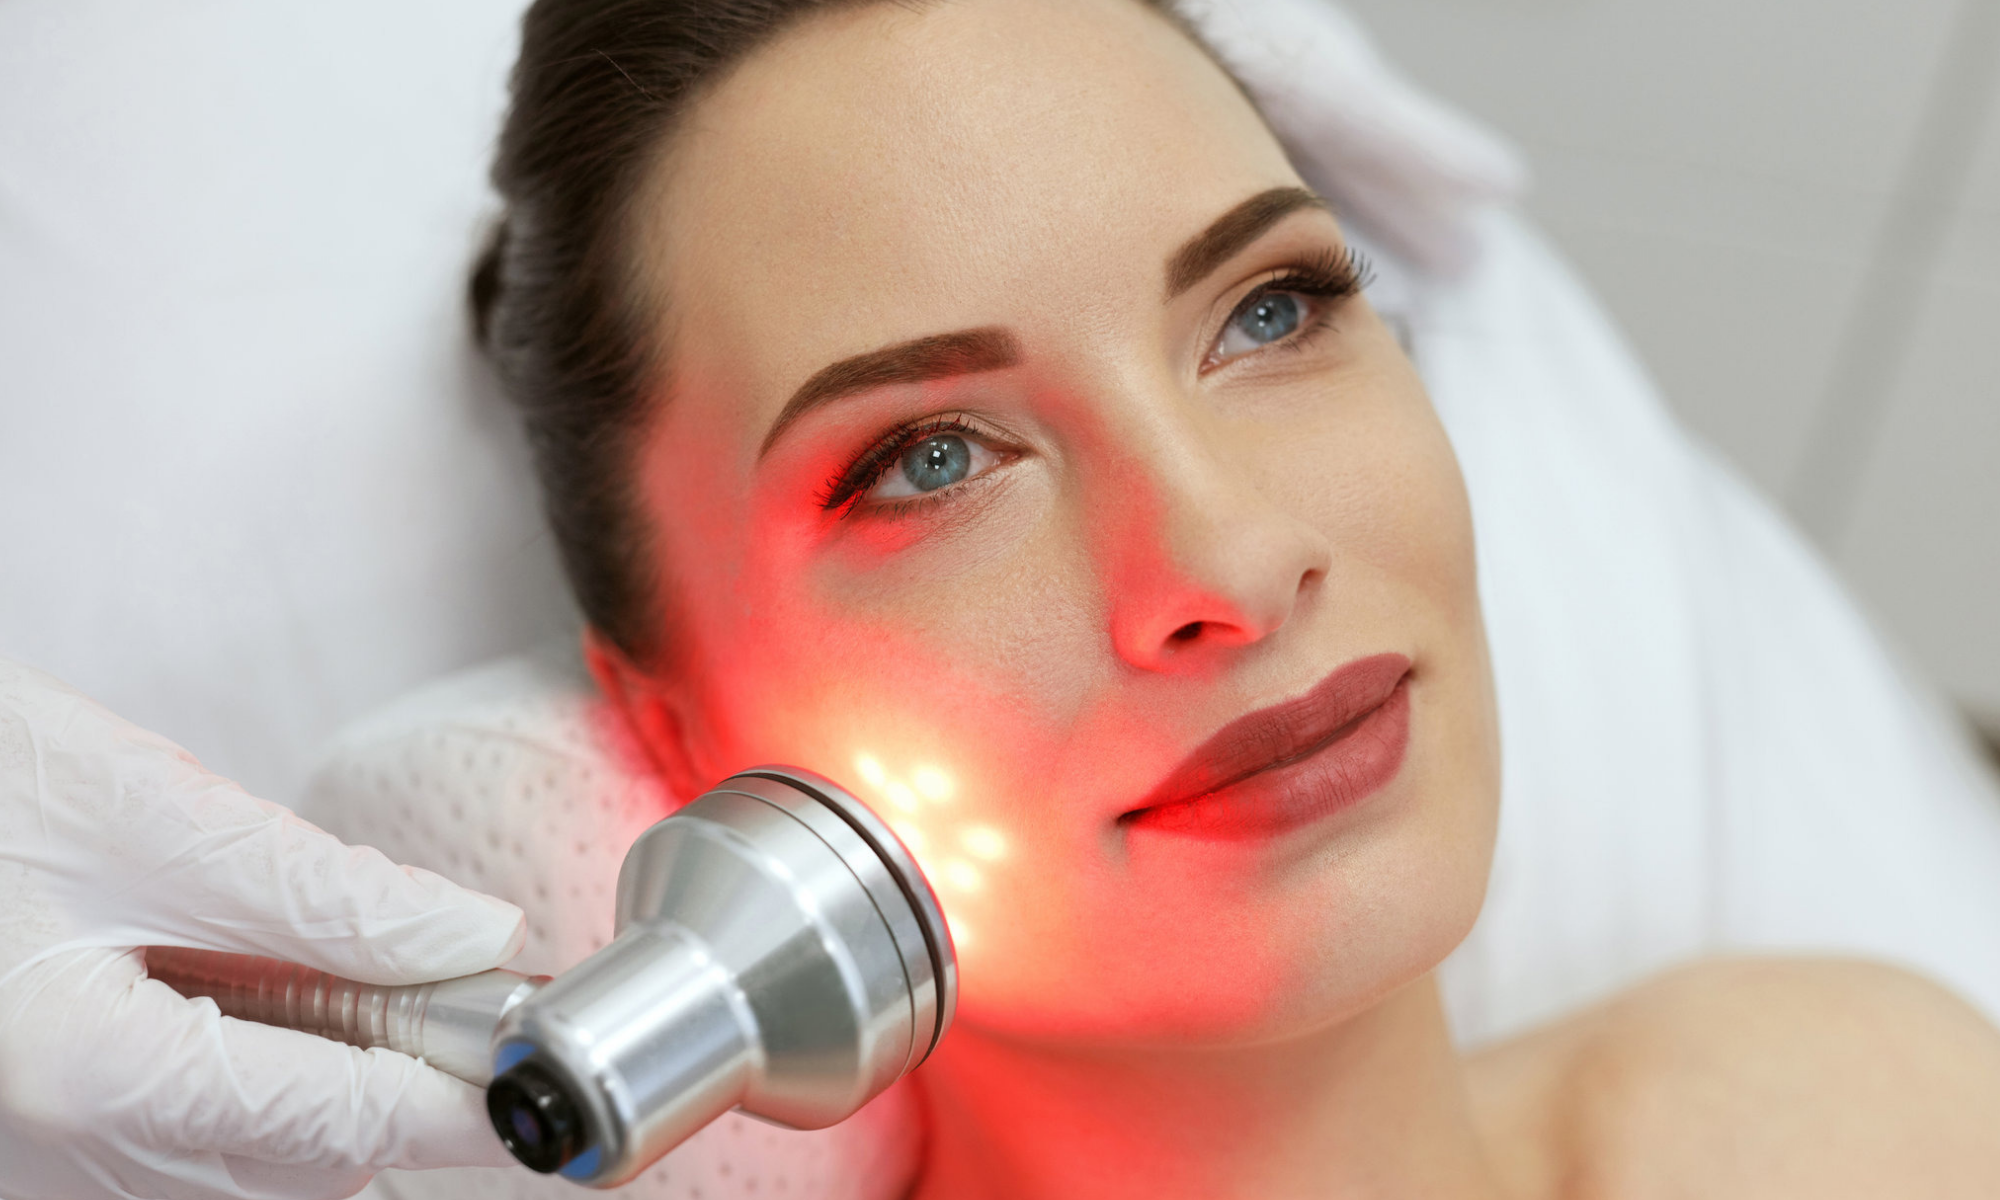 Red light therapy for your face and body